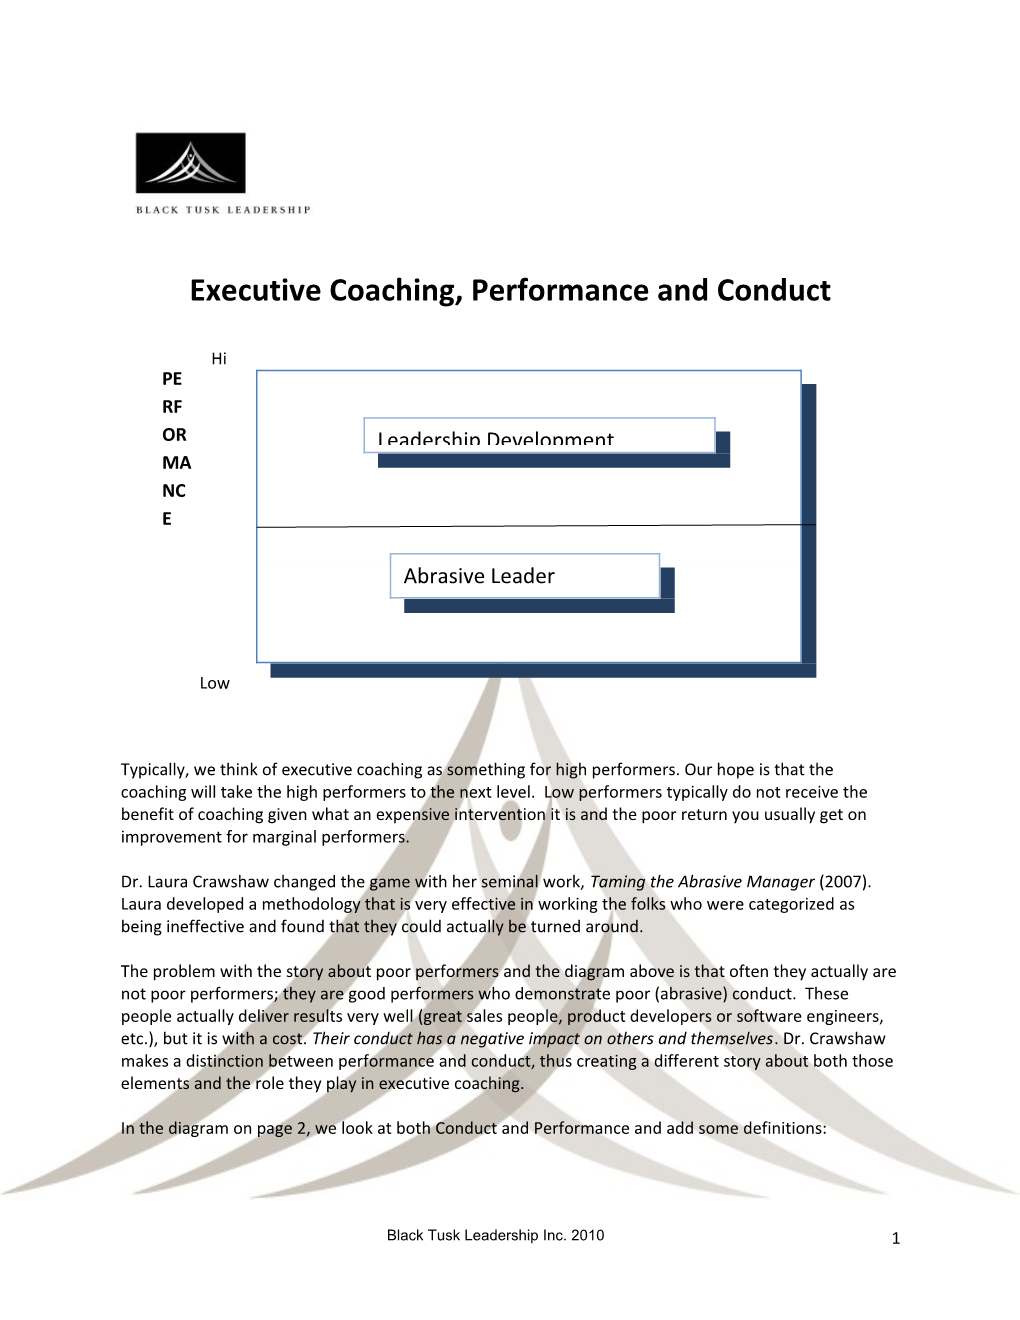 Executive Coaching, Performance and Conduct